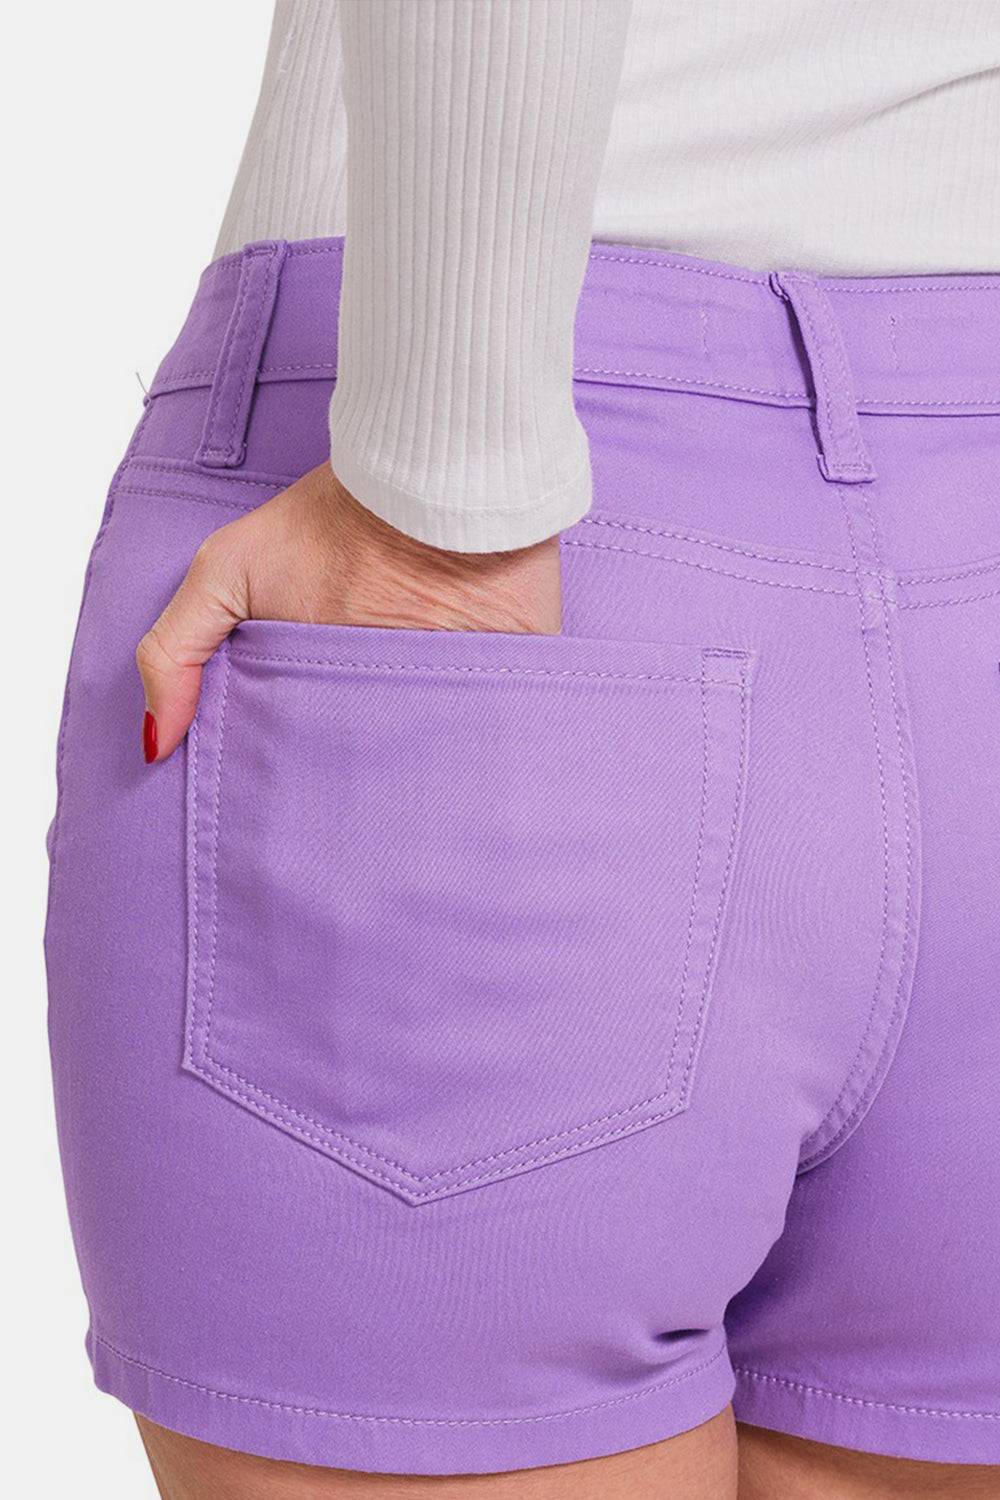 a close up of a person wearing purple shorts